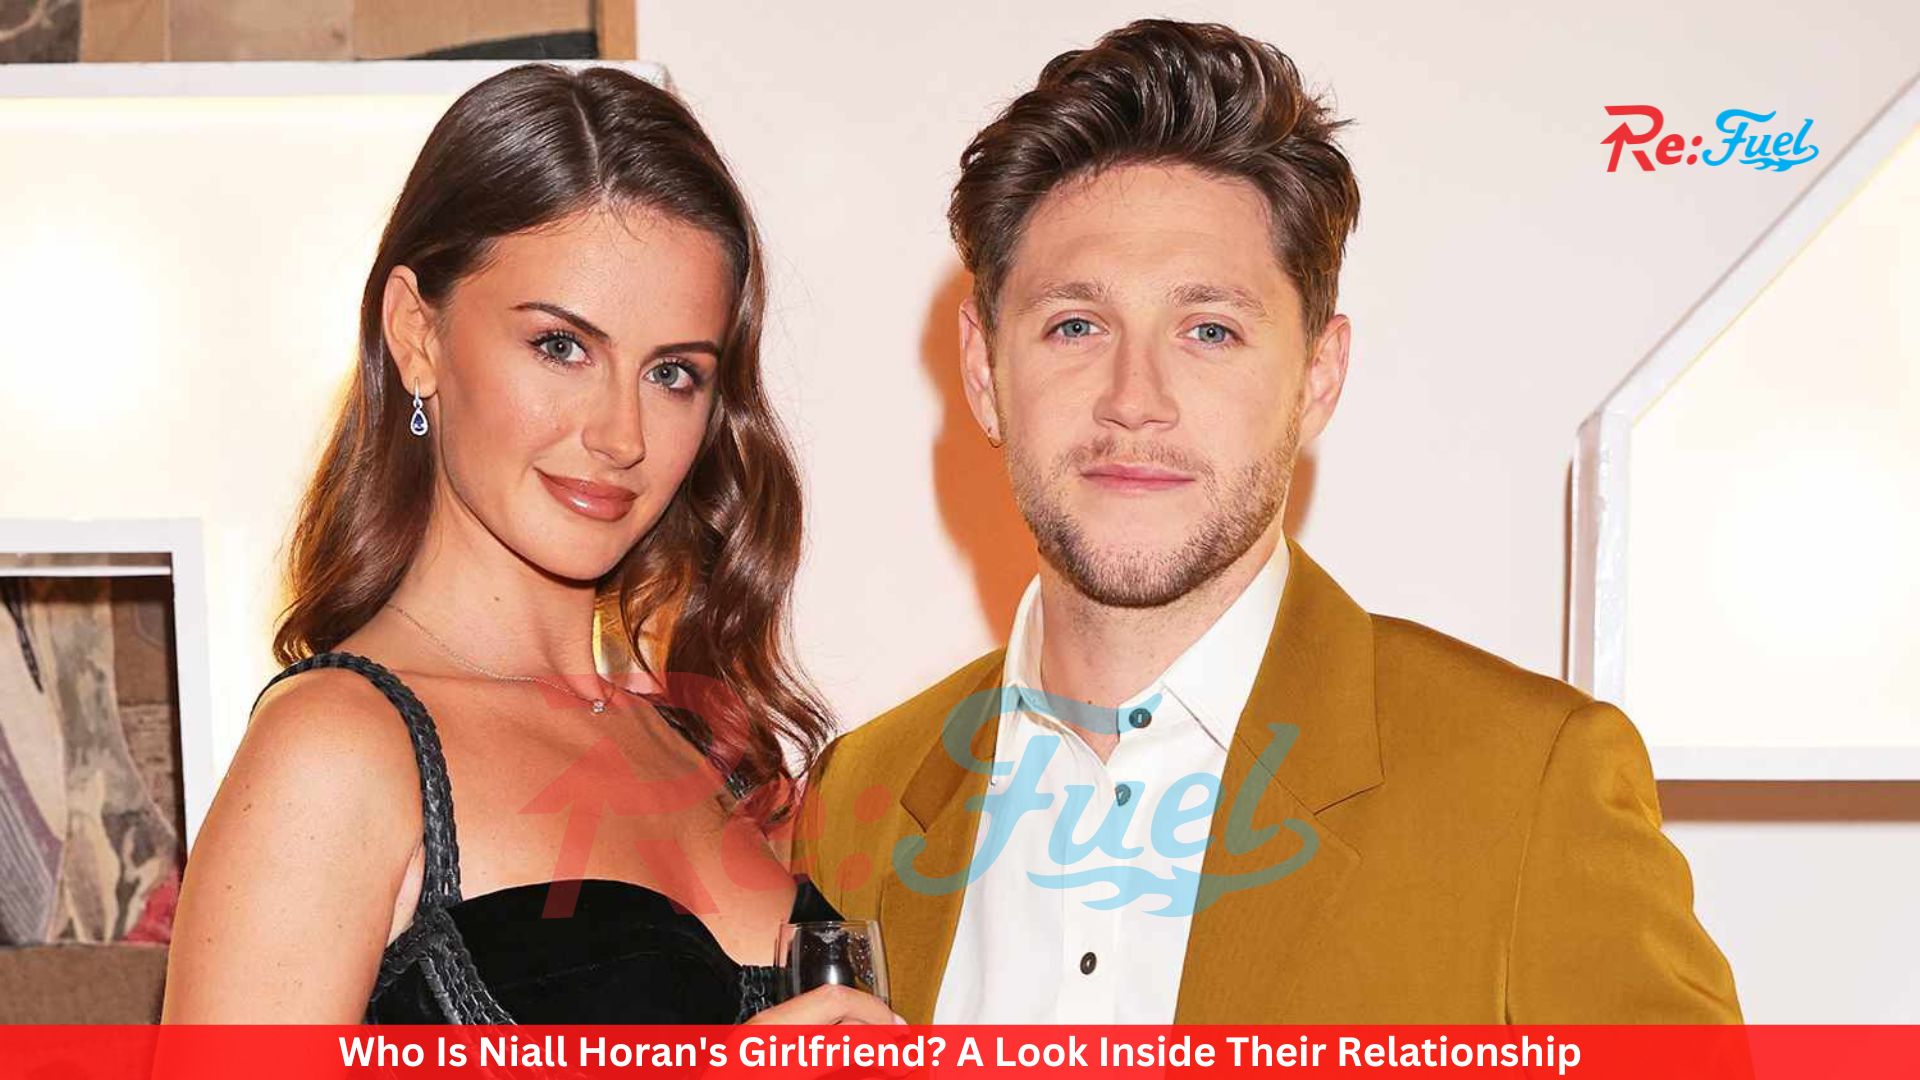 Who Is Niall Horan's Girlfriend? A Look Inside Their Relationship